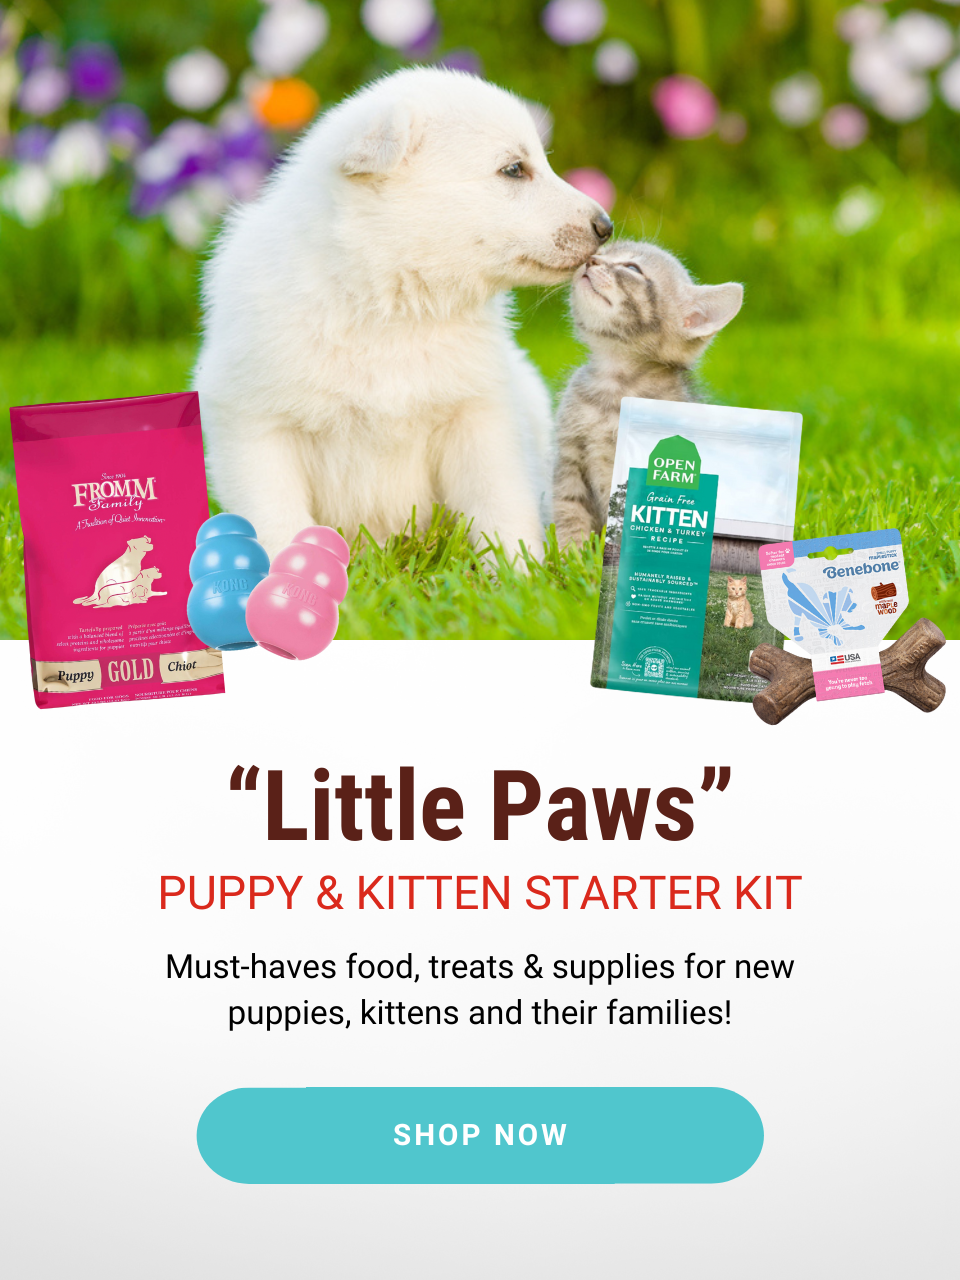 "Little Paws" puppy and kitten starter kit! Must-haves food, treats & supplies for new puppies, kittens and their families!